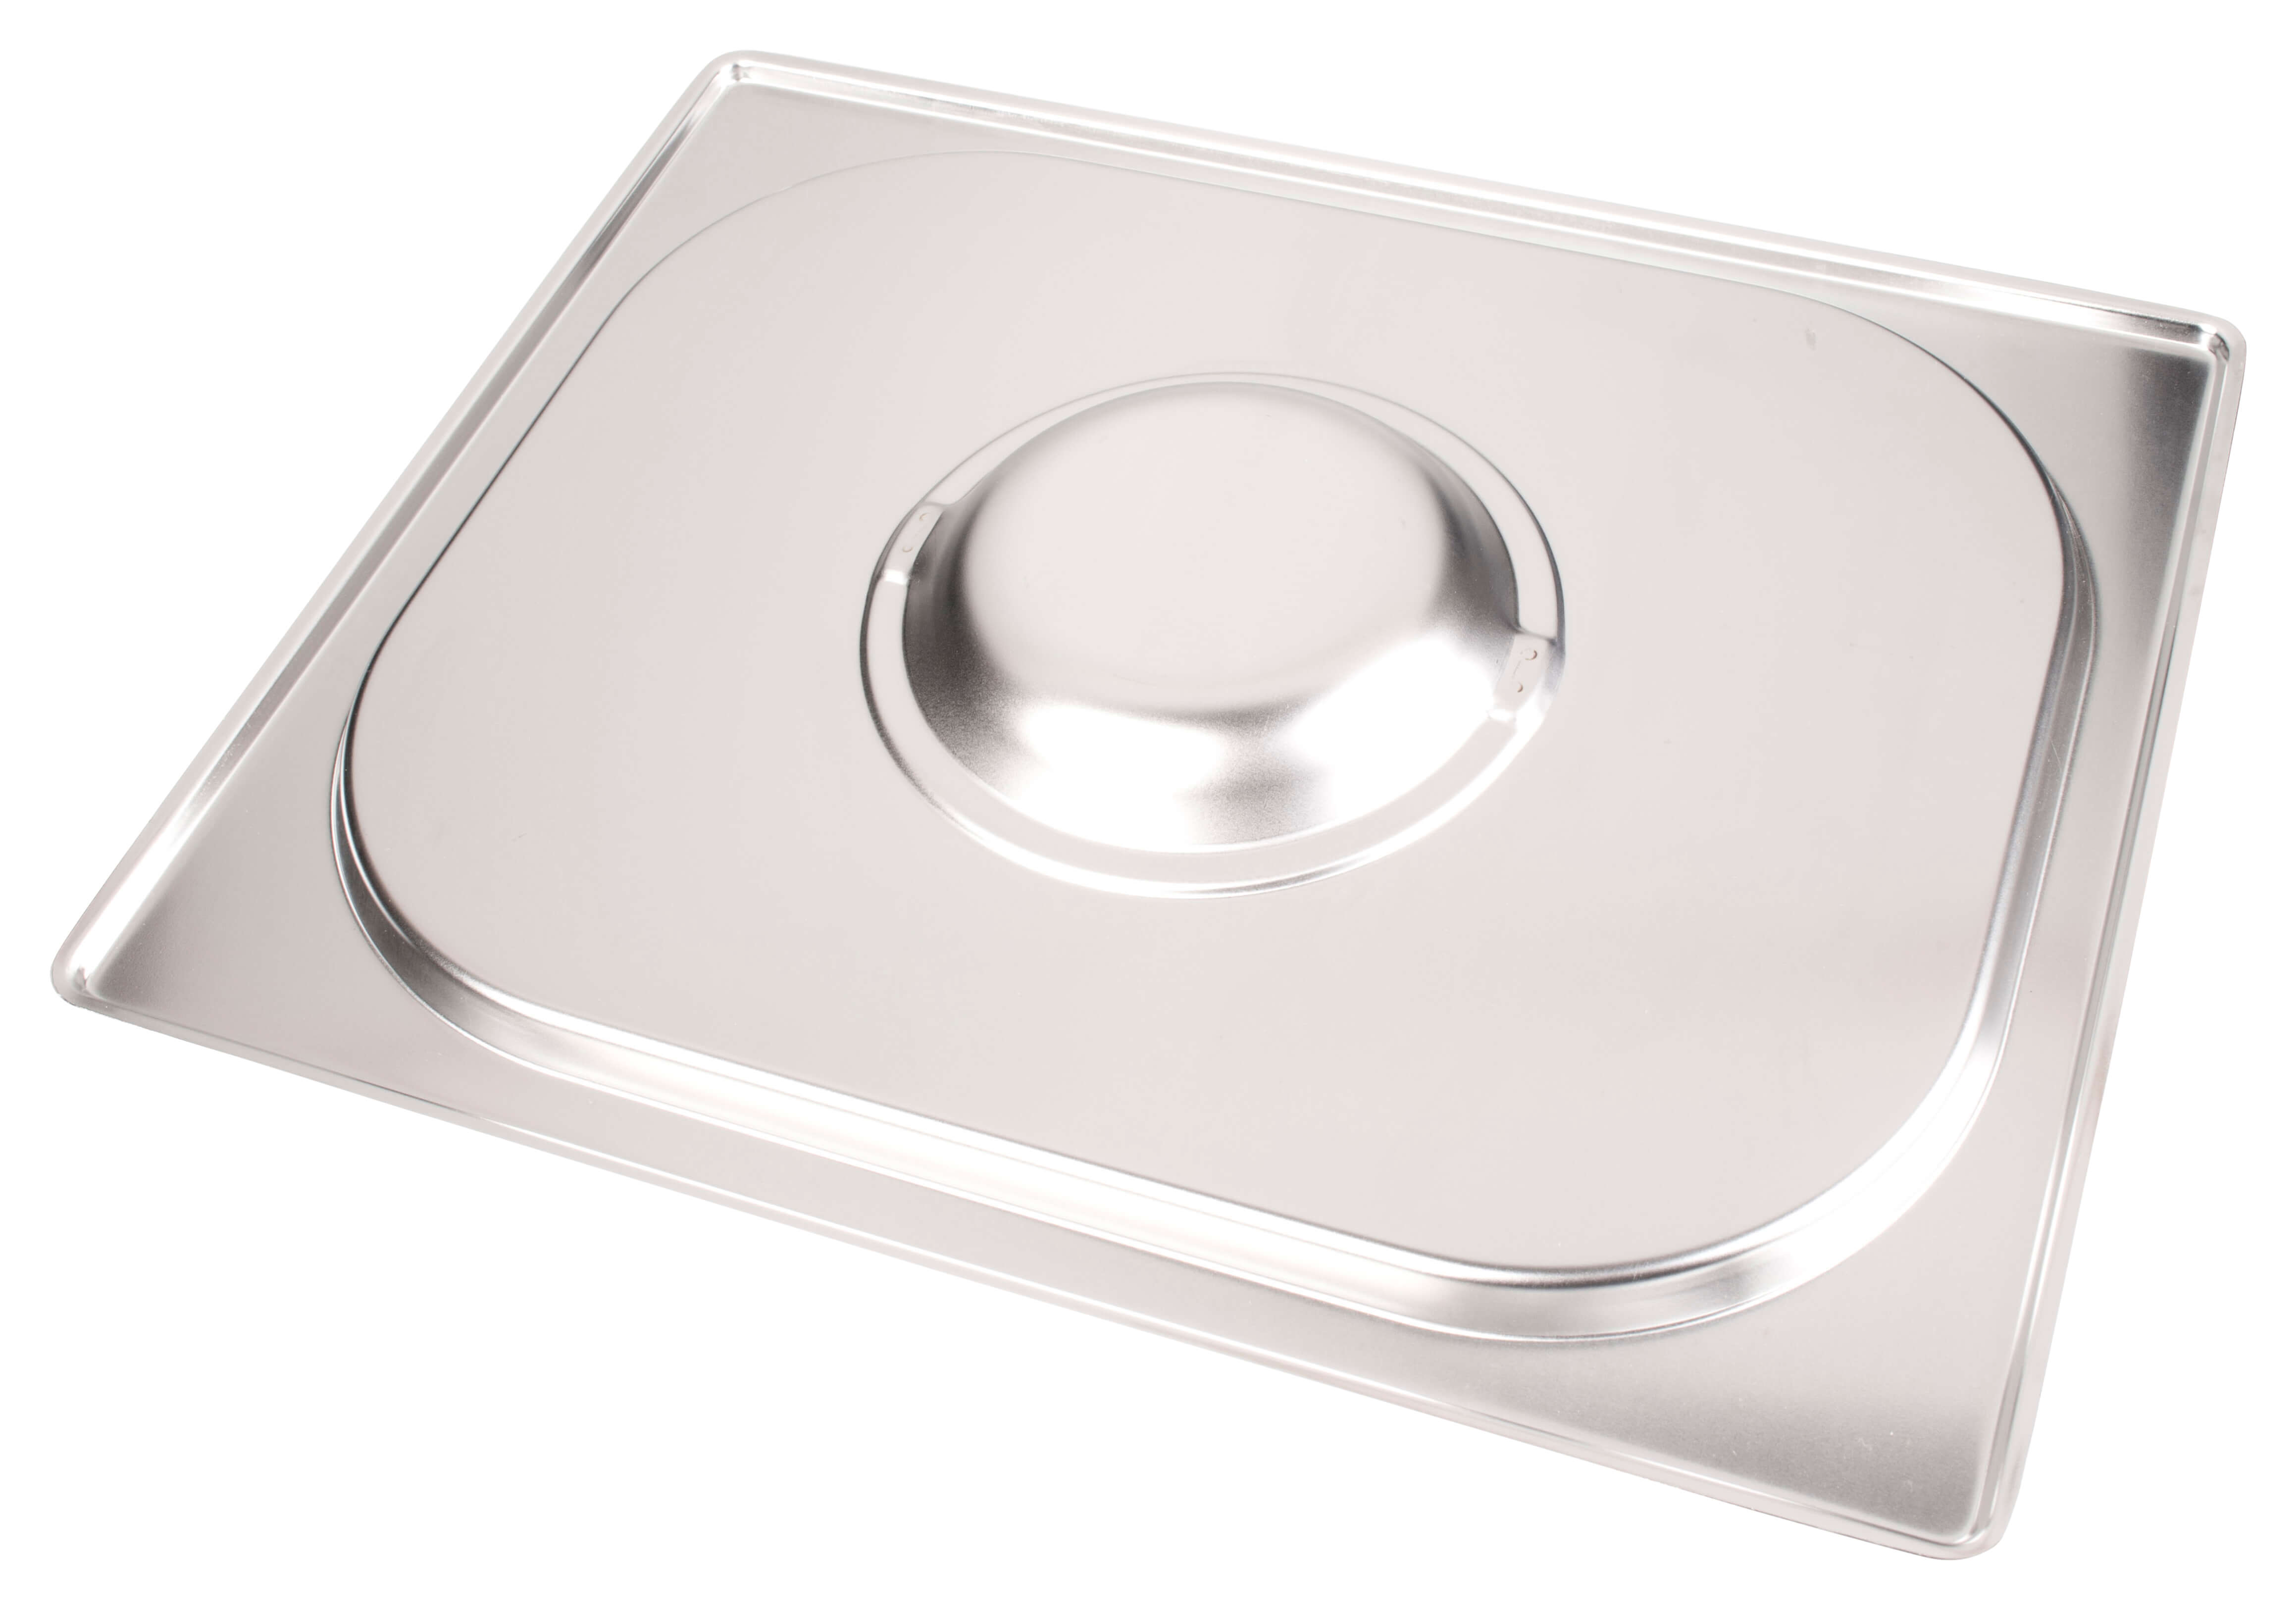 Lid for GN container - 1/2 (Stainless steel)